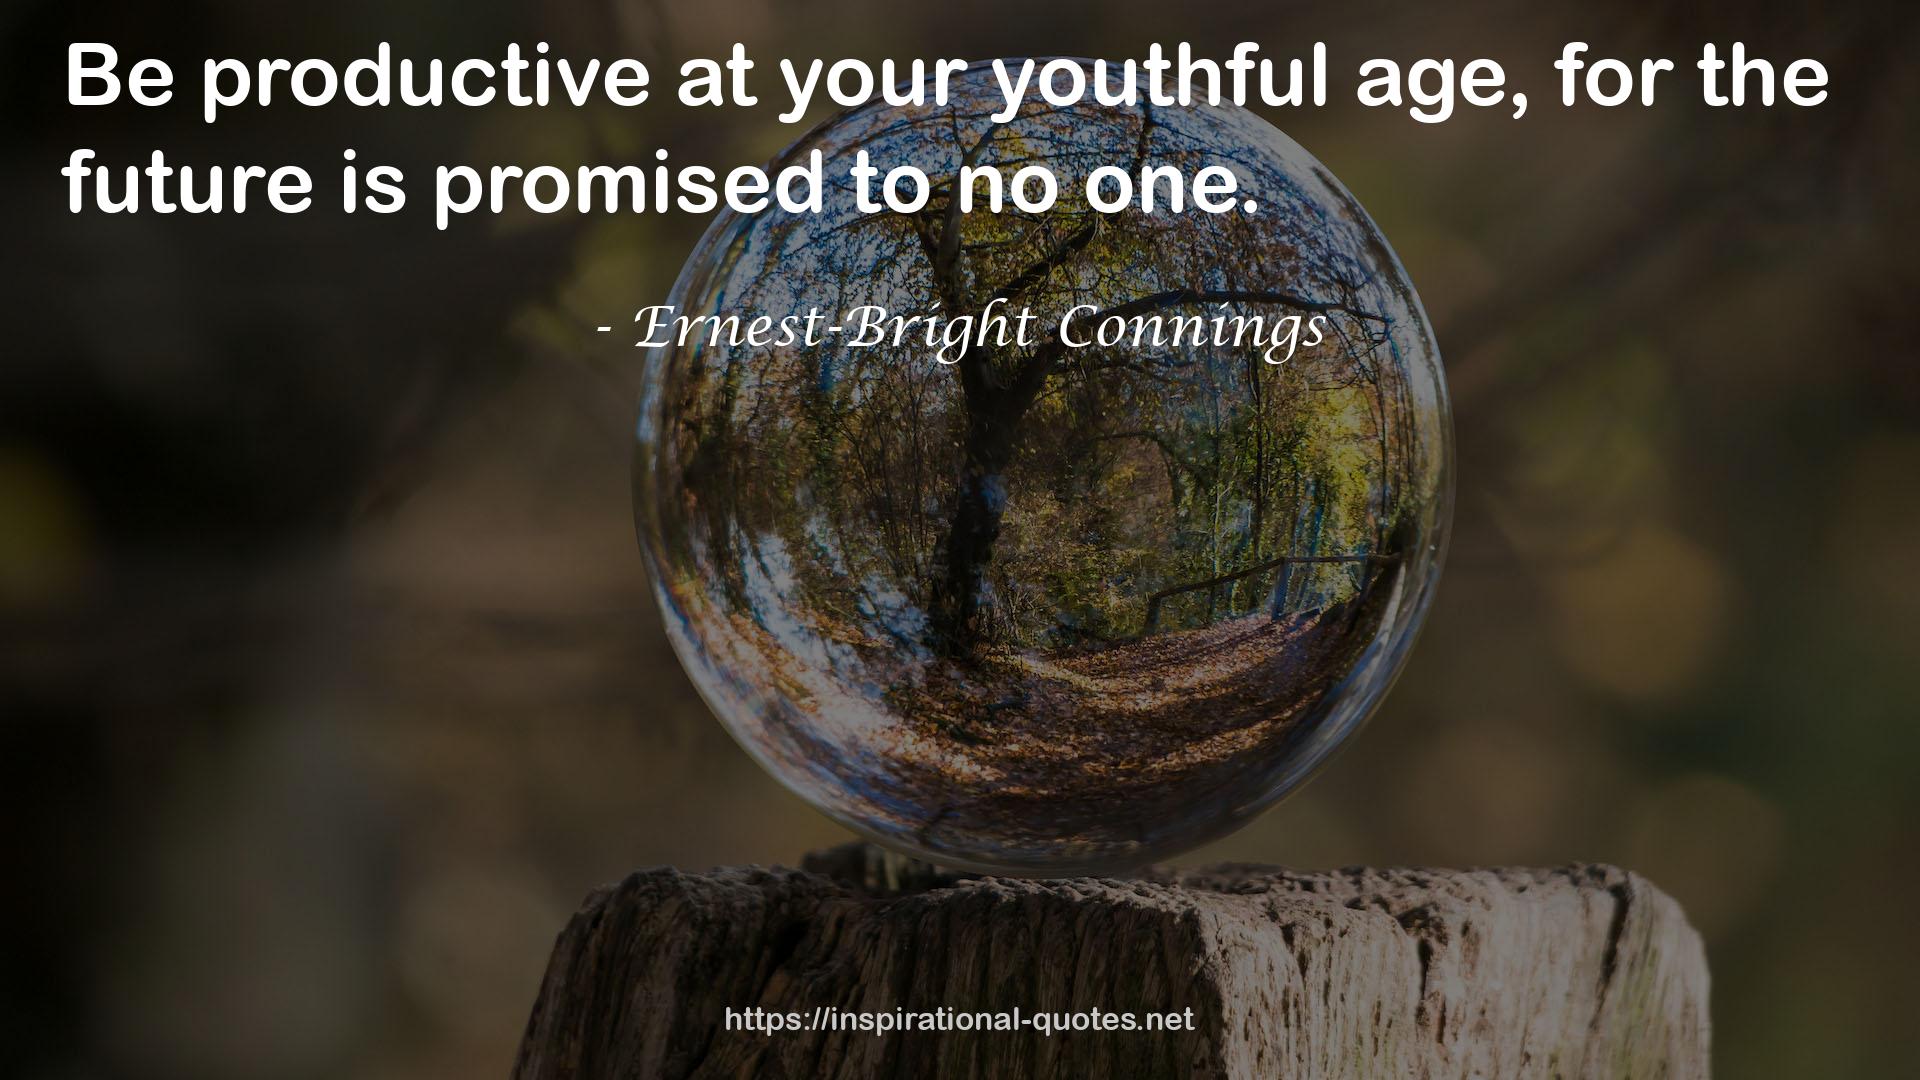 Ernest-Bright Connings QUOTES